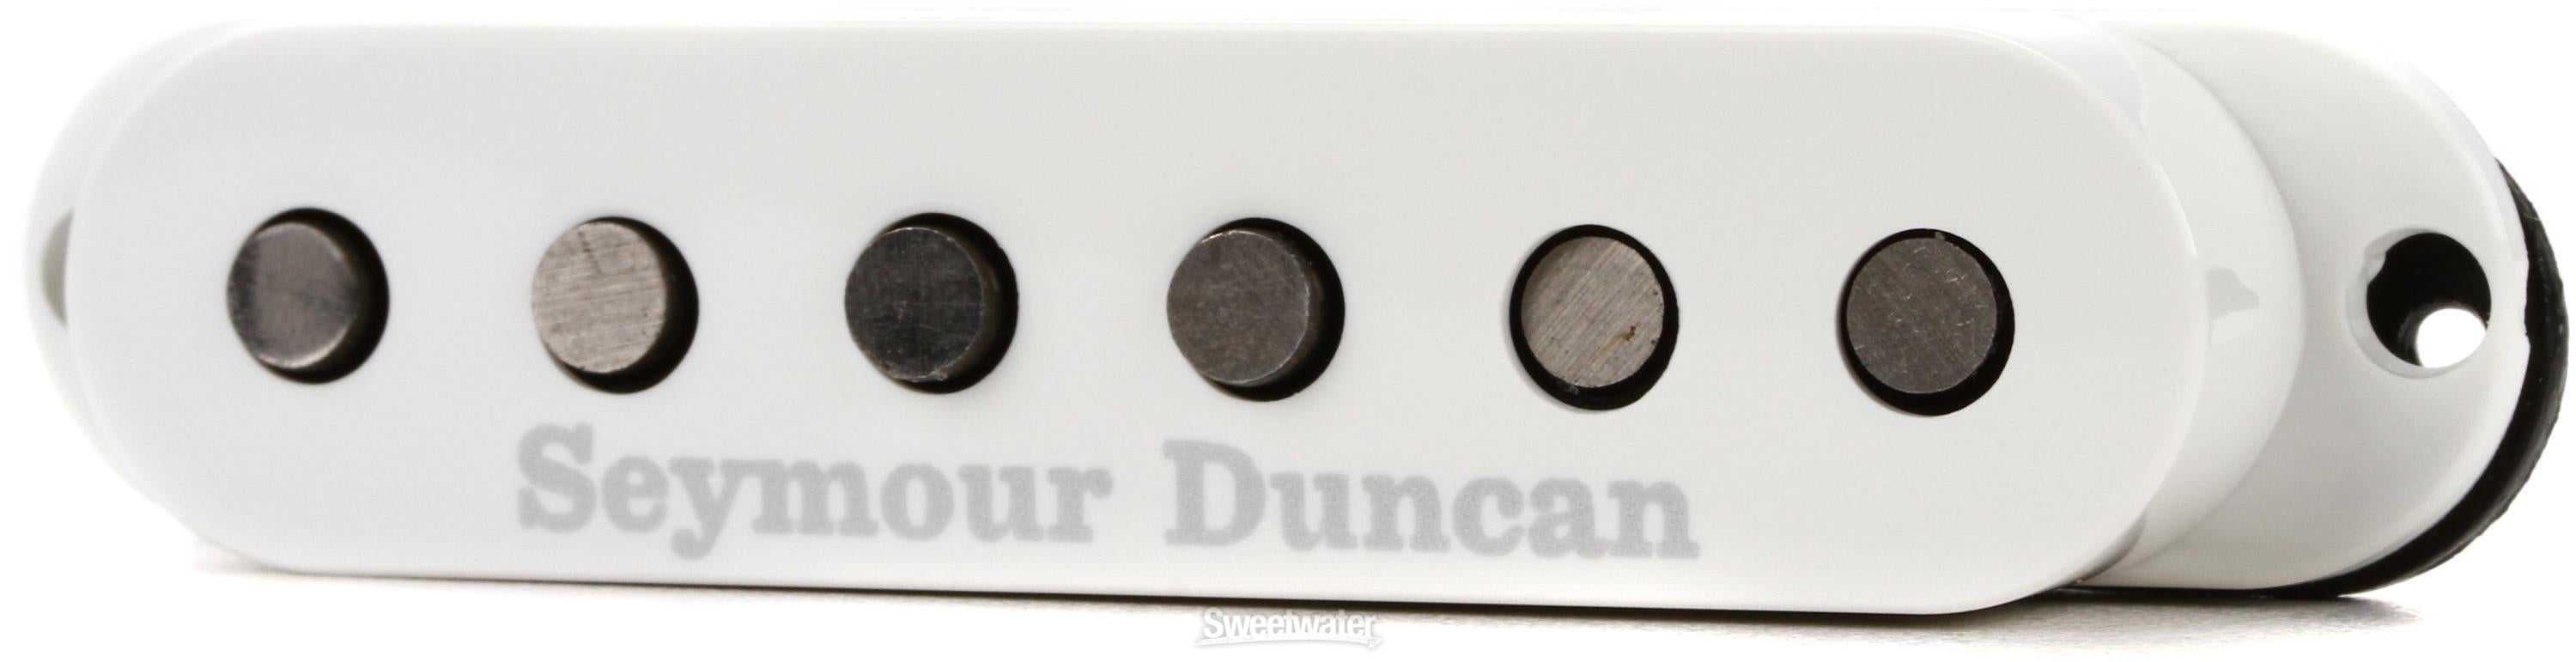 Seymour Duncan SSL-5 Custom Staggered Pole Middle (RWRP) Strat Single Coil  Pickup - White